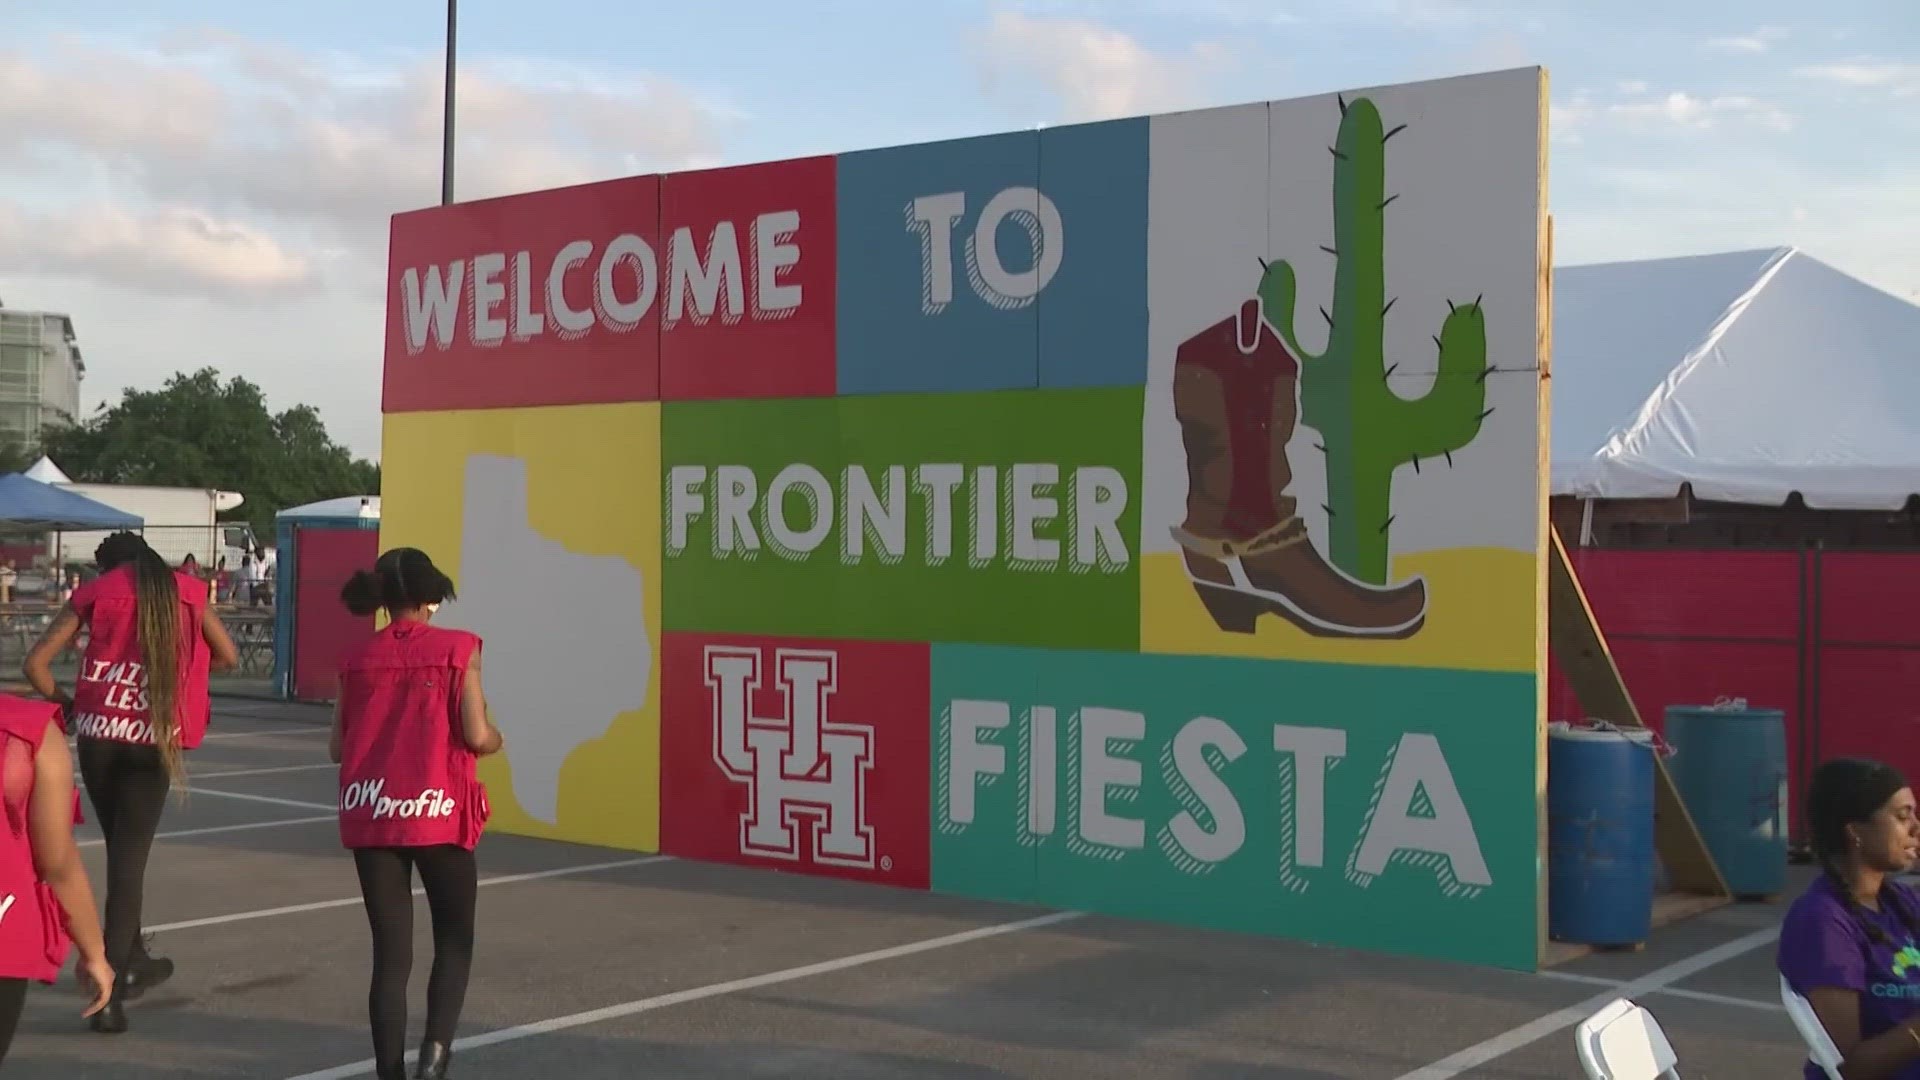 Frontier Fiesta is a tradition dating back to the late 30s, starting as a gathering completely run and funded by students.